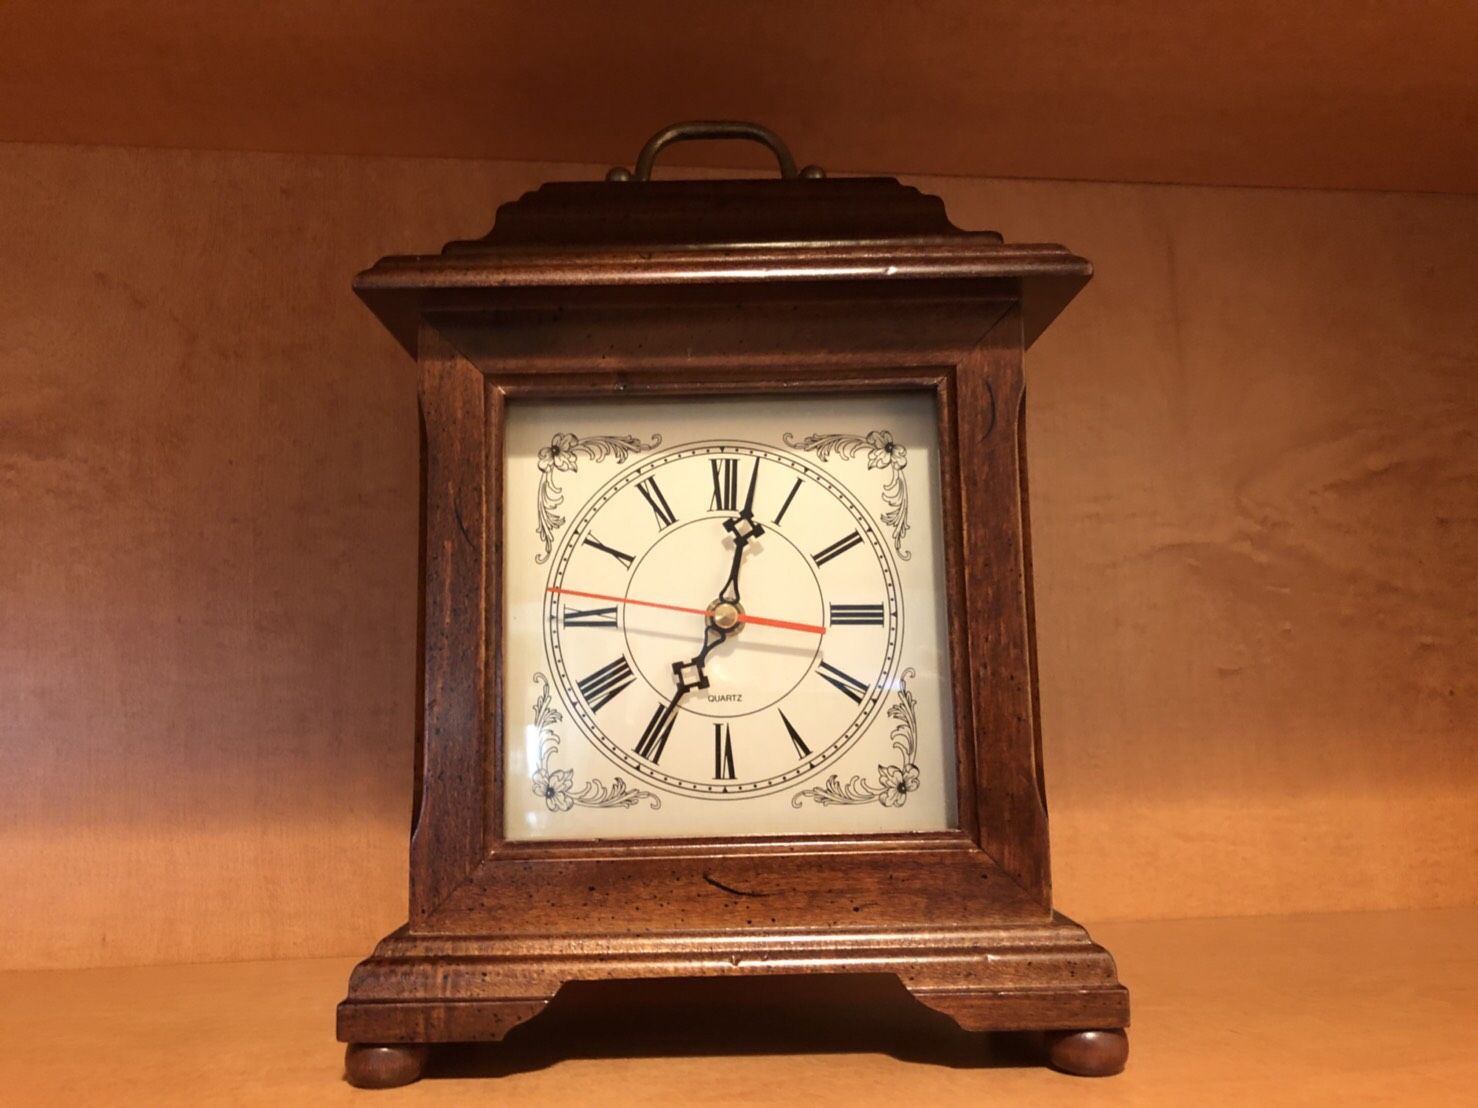 Classic wooden clock in like-new condition